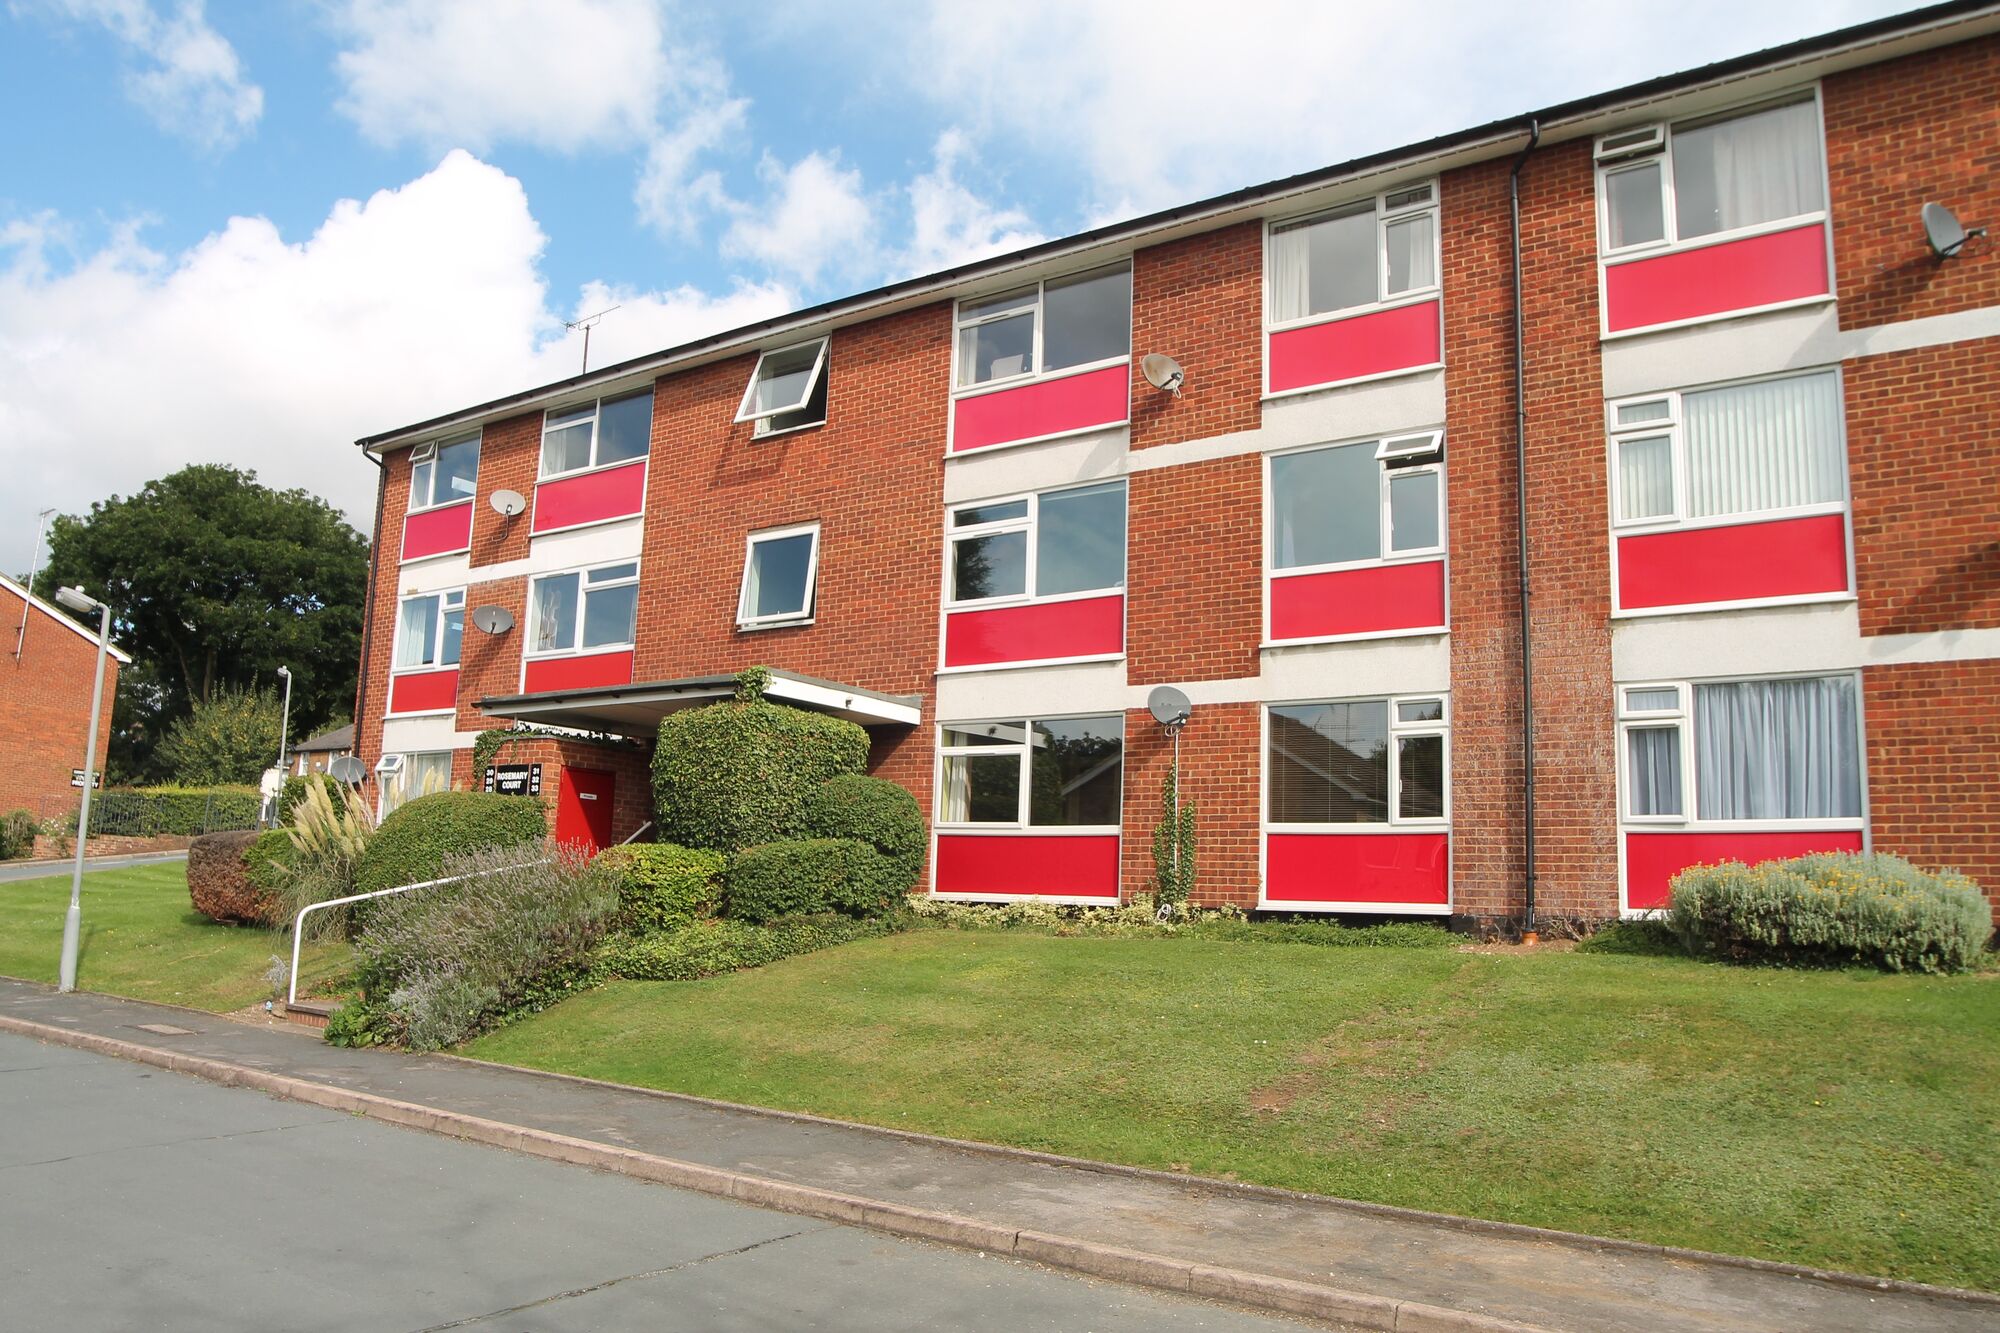 2 bedroom  flat to rent, Available now Rosemary Close, High Wycombe, HP12, main image